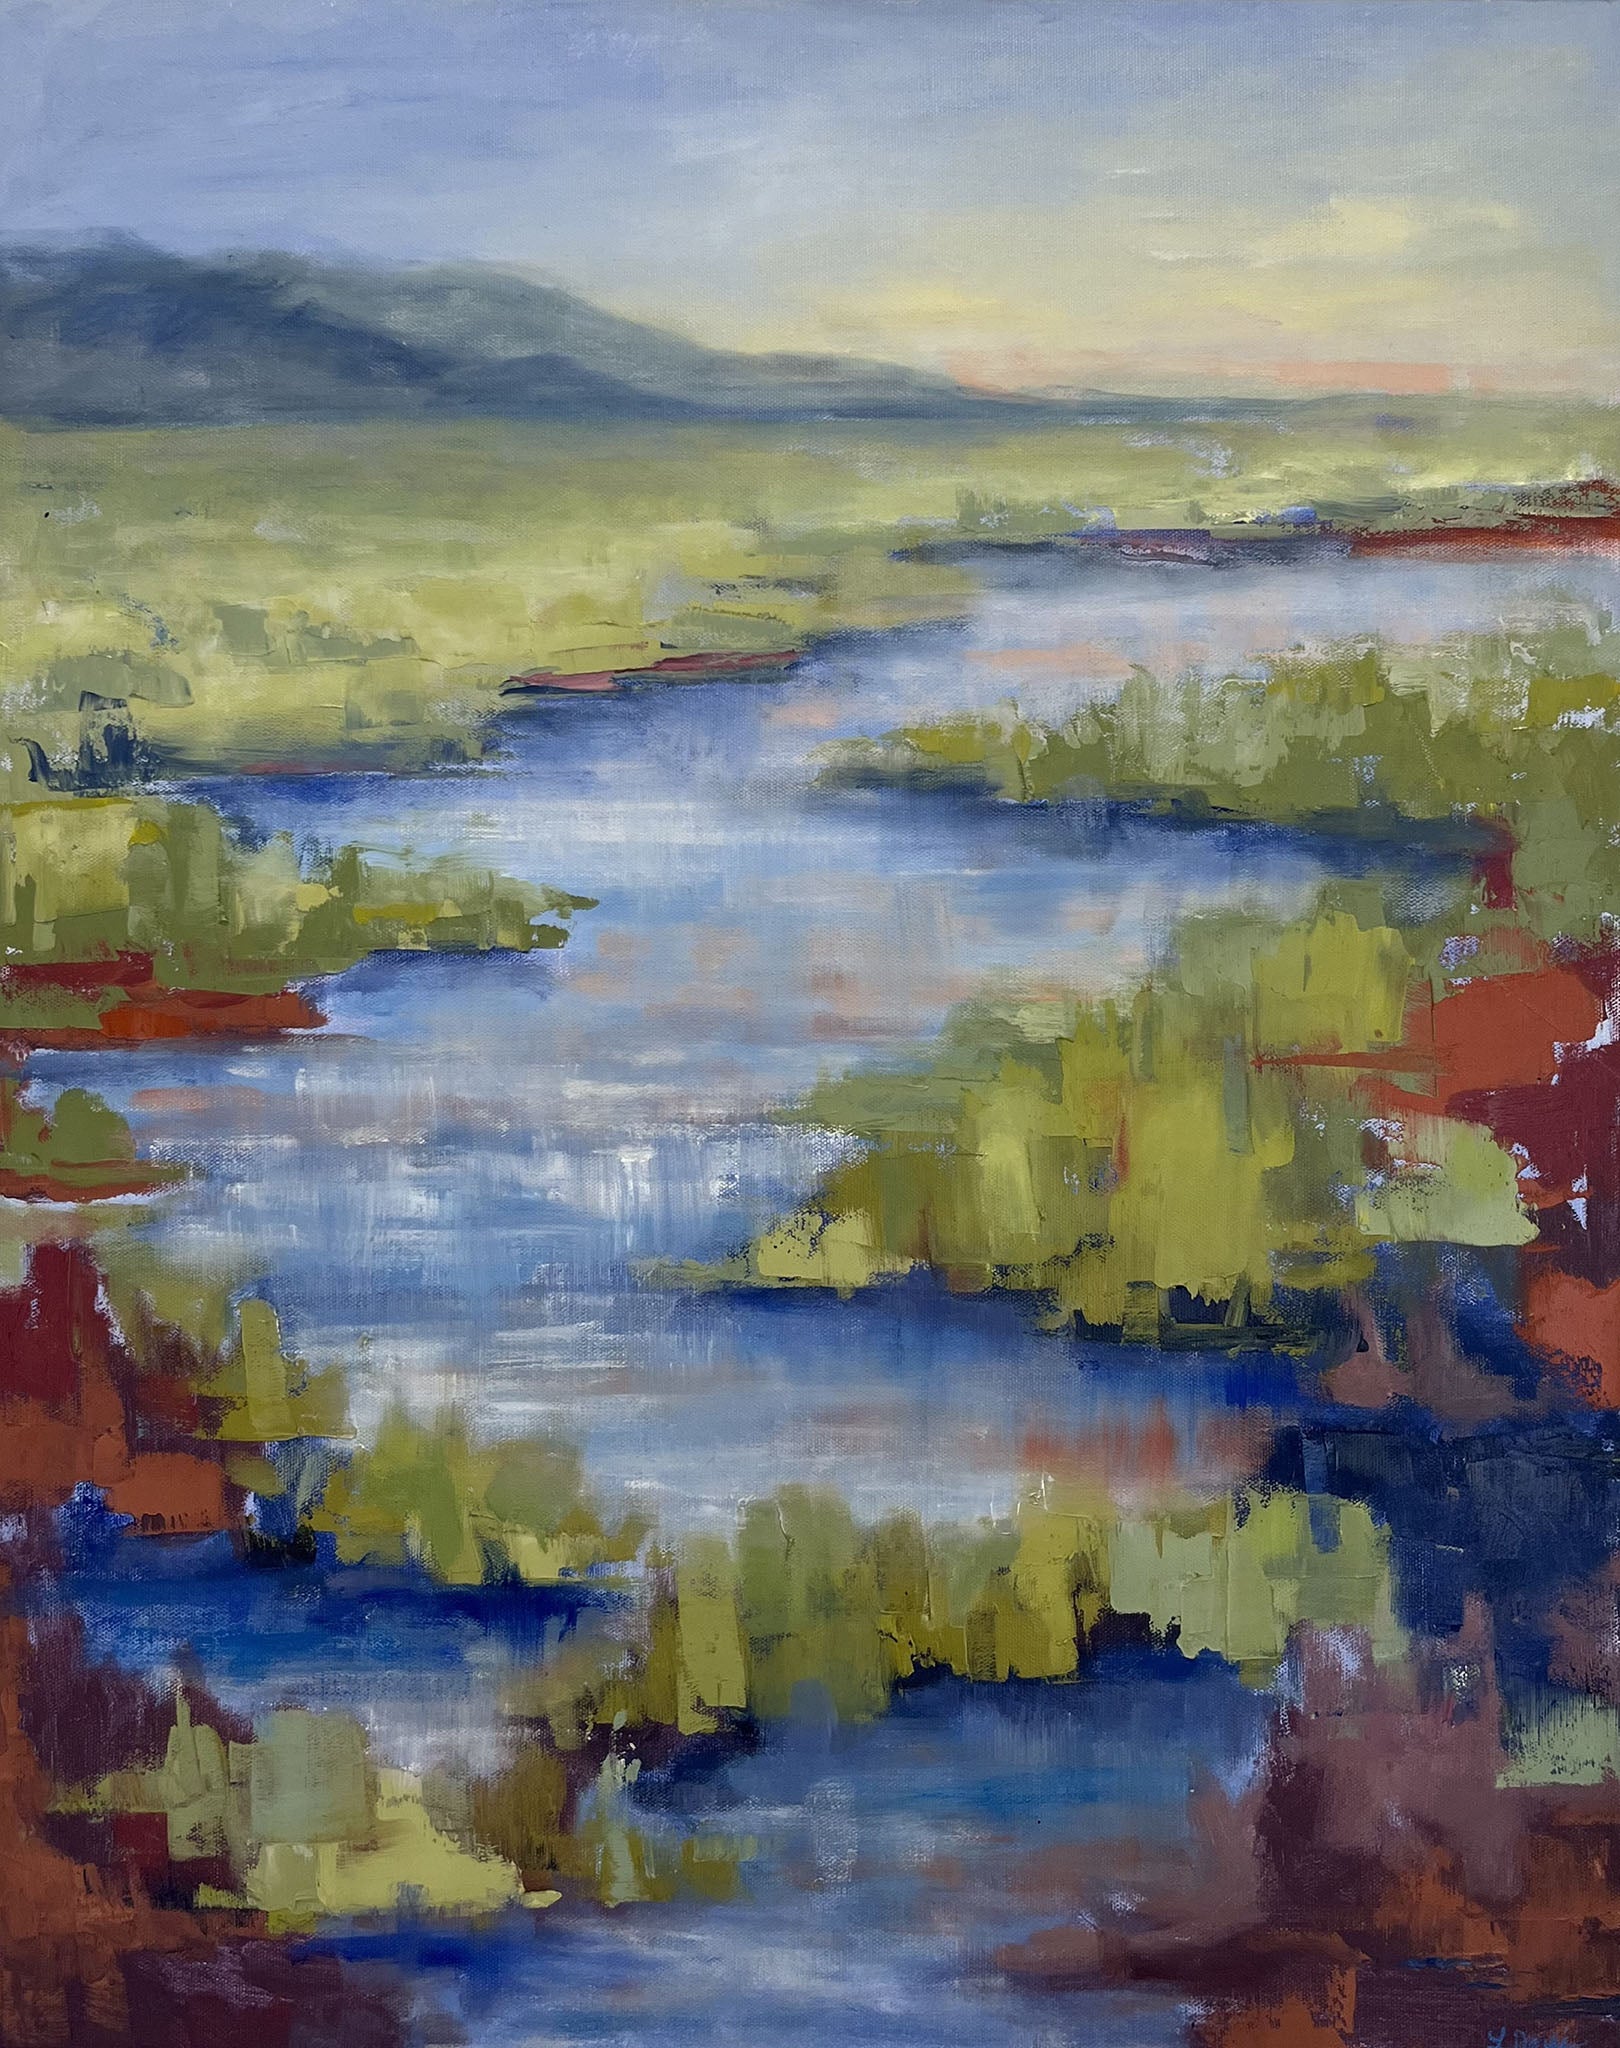 Painting depicting a river running through a field. The river is a bright blue while the grass surrounding the river is a light green. You can see the outline of a mountain range in the distance in the top left section of the painting. 30"x24"x1.5" oil by Lelia Davis